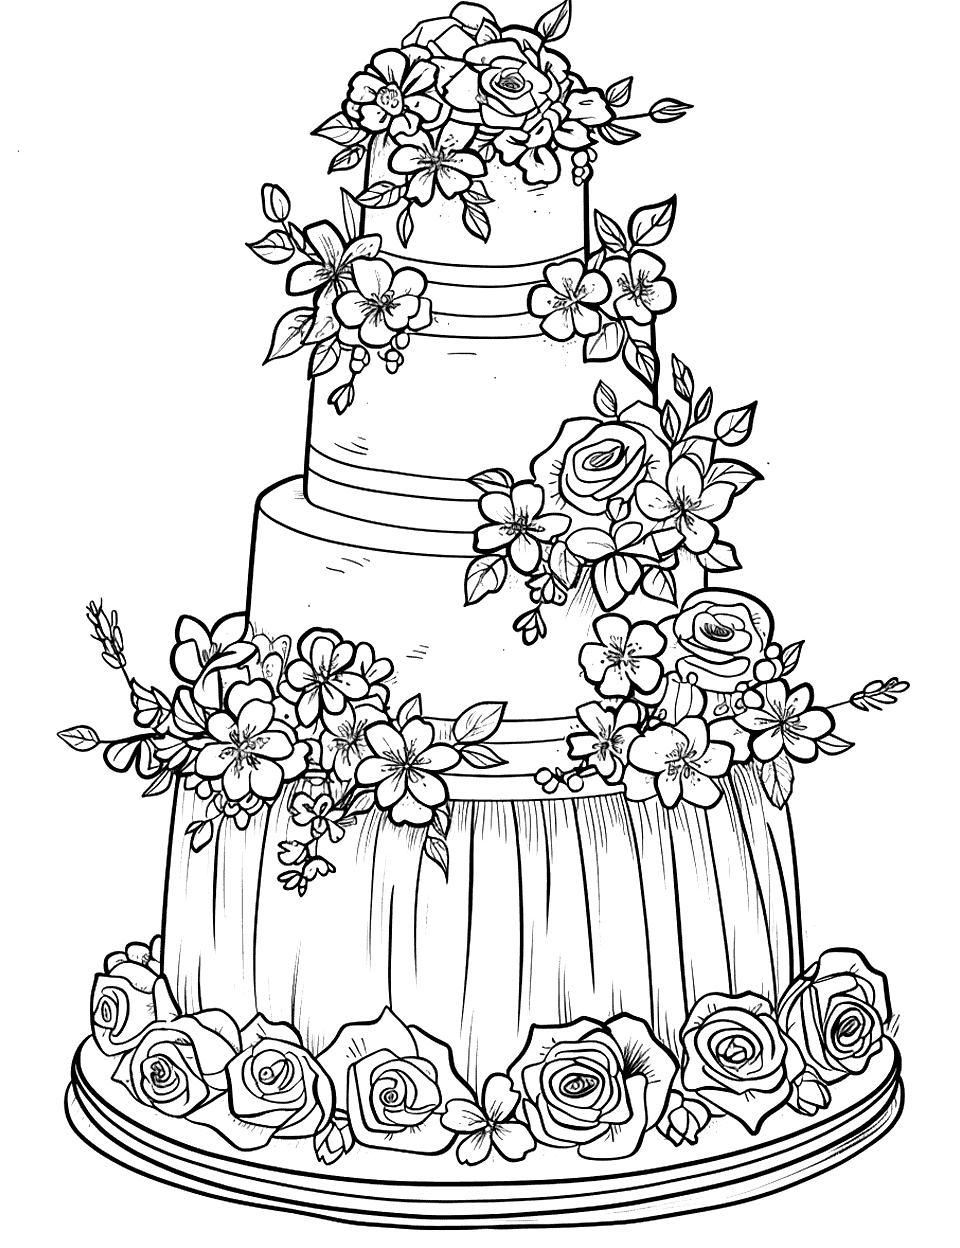 Wedding Cake Delight Coloring Page - A large, multi-tiered wedding cake decorated with flowers.